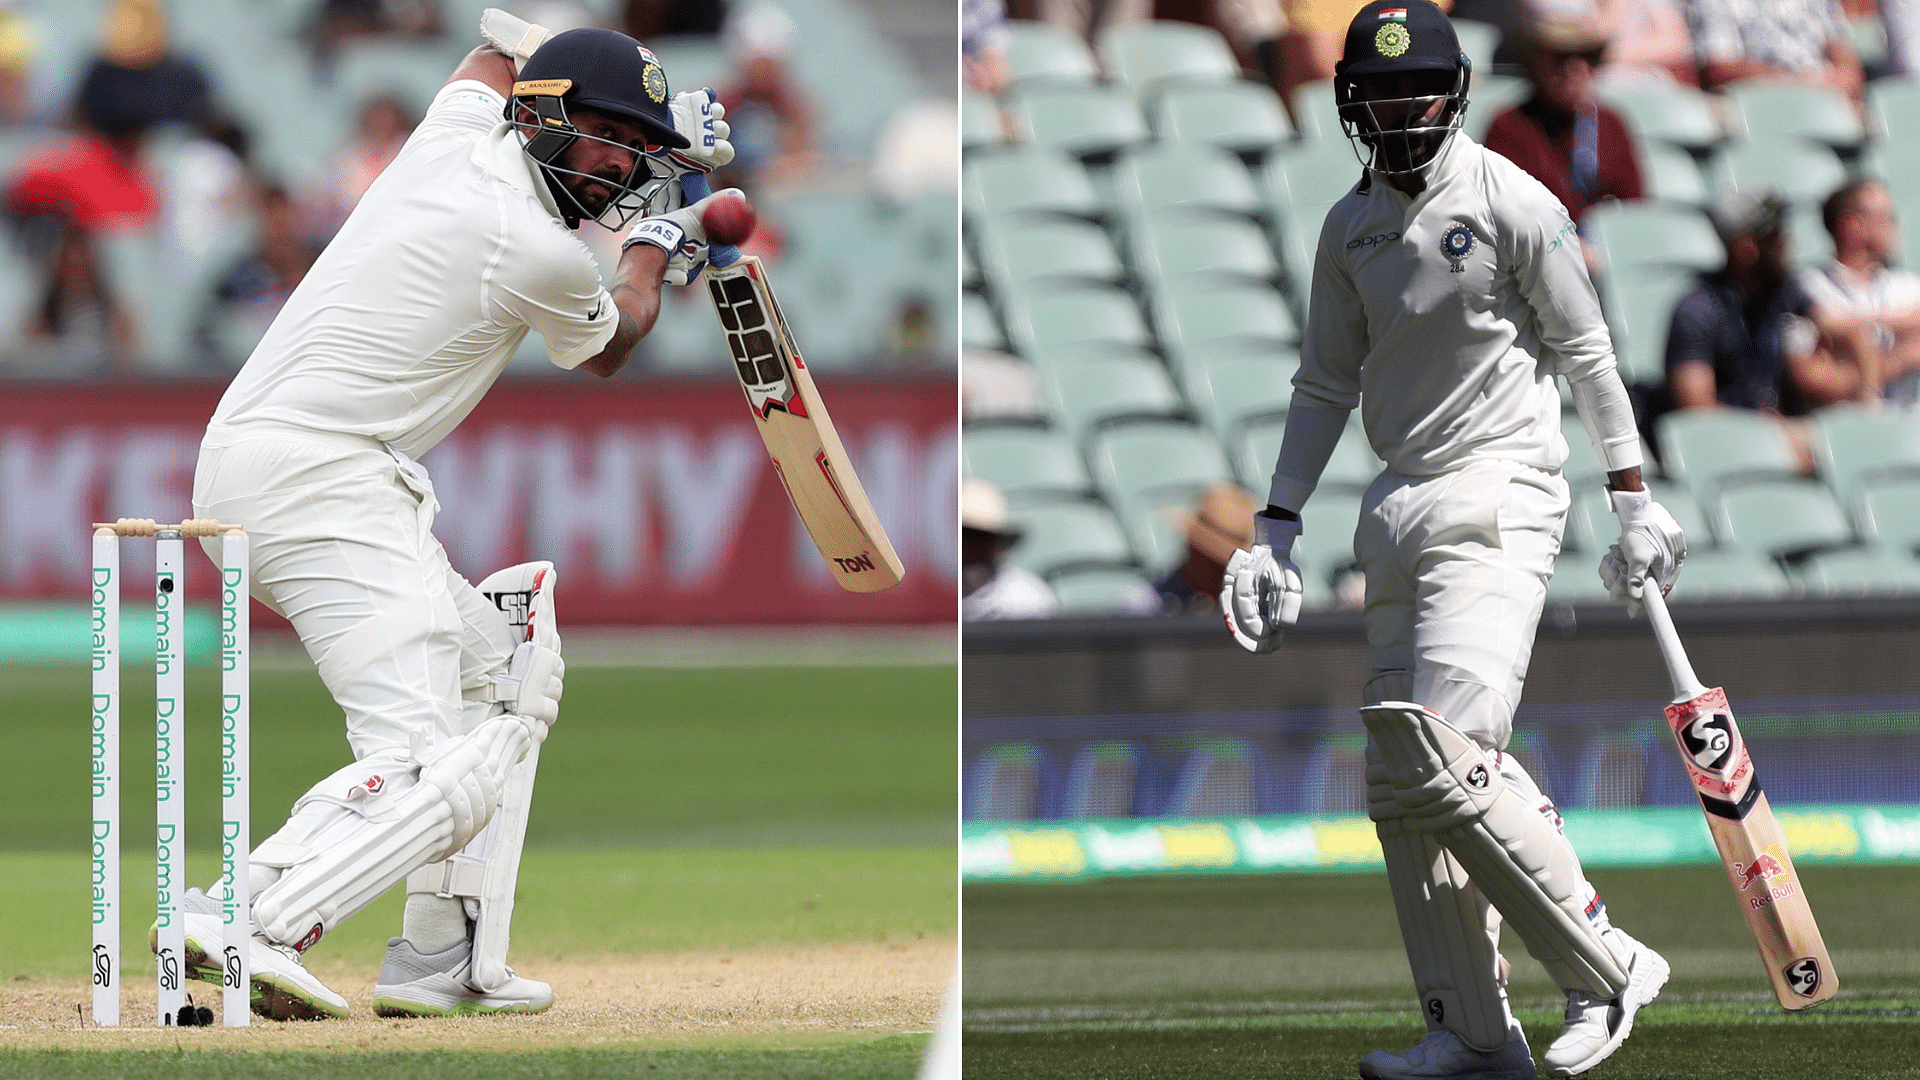 Murali Vijay (left) and KL Rahul have struggled to get going away from home this year.